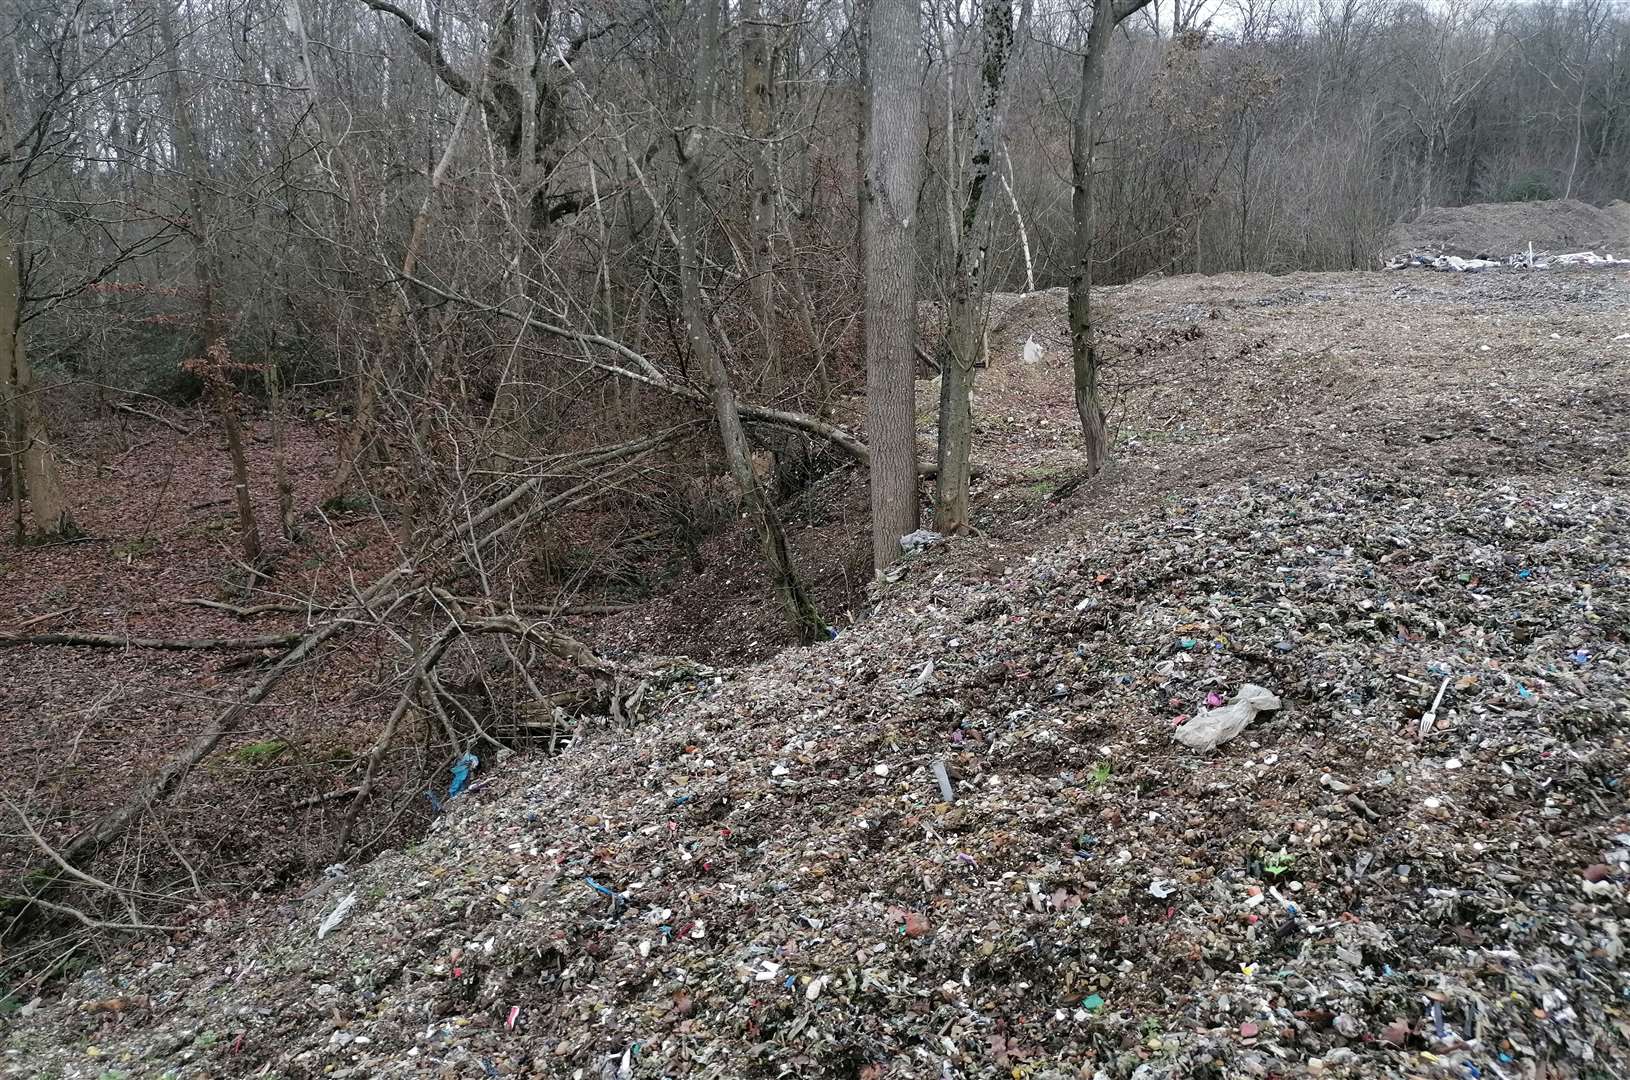 Huge piles of rubbish have been spotted in Hoad’s Wood